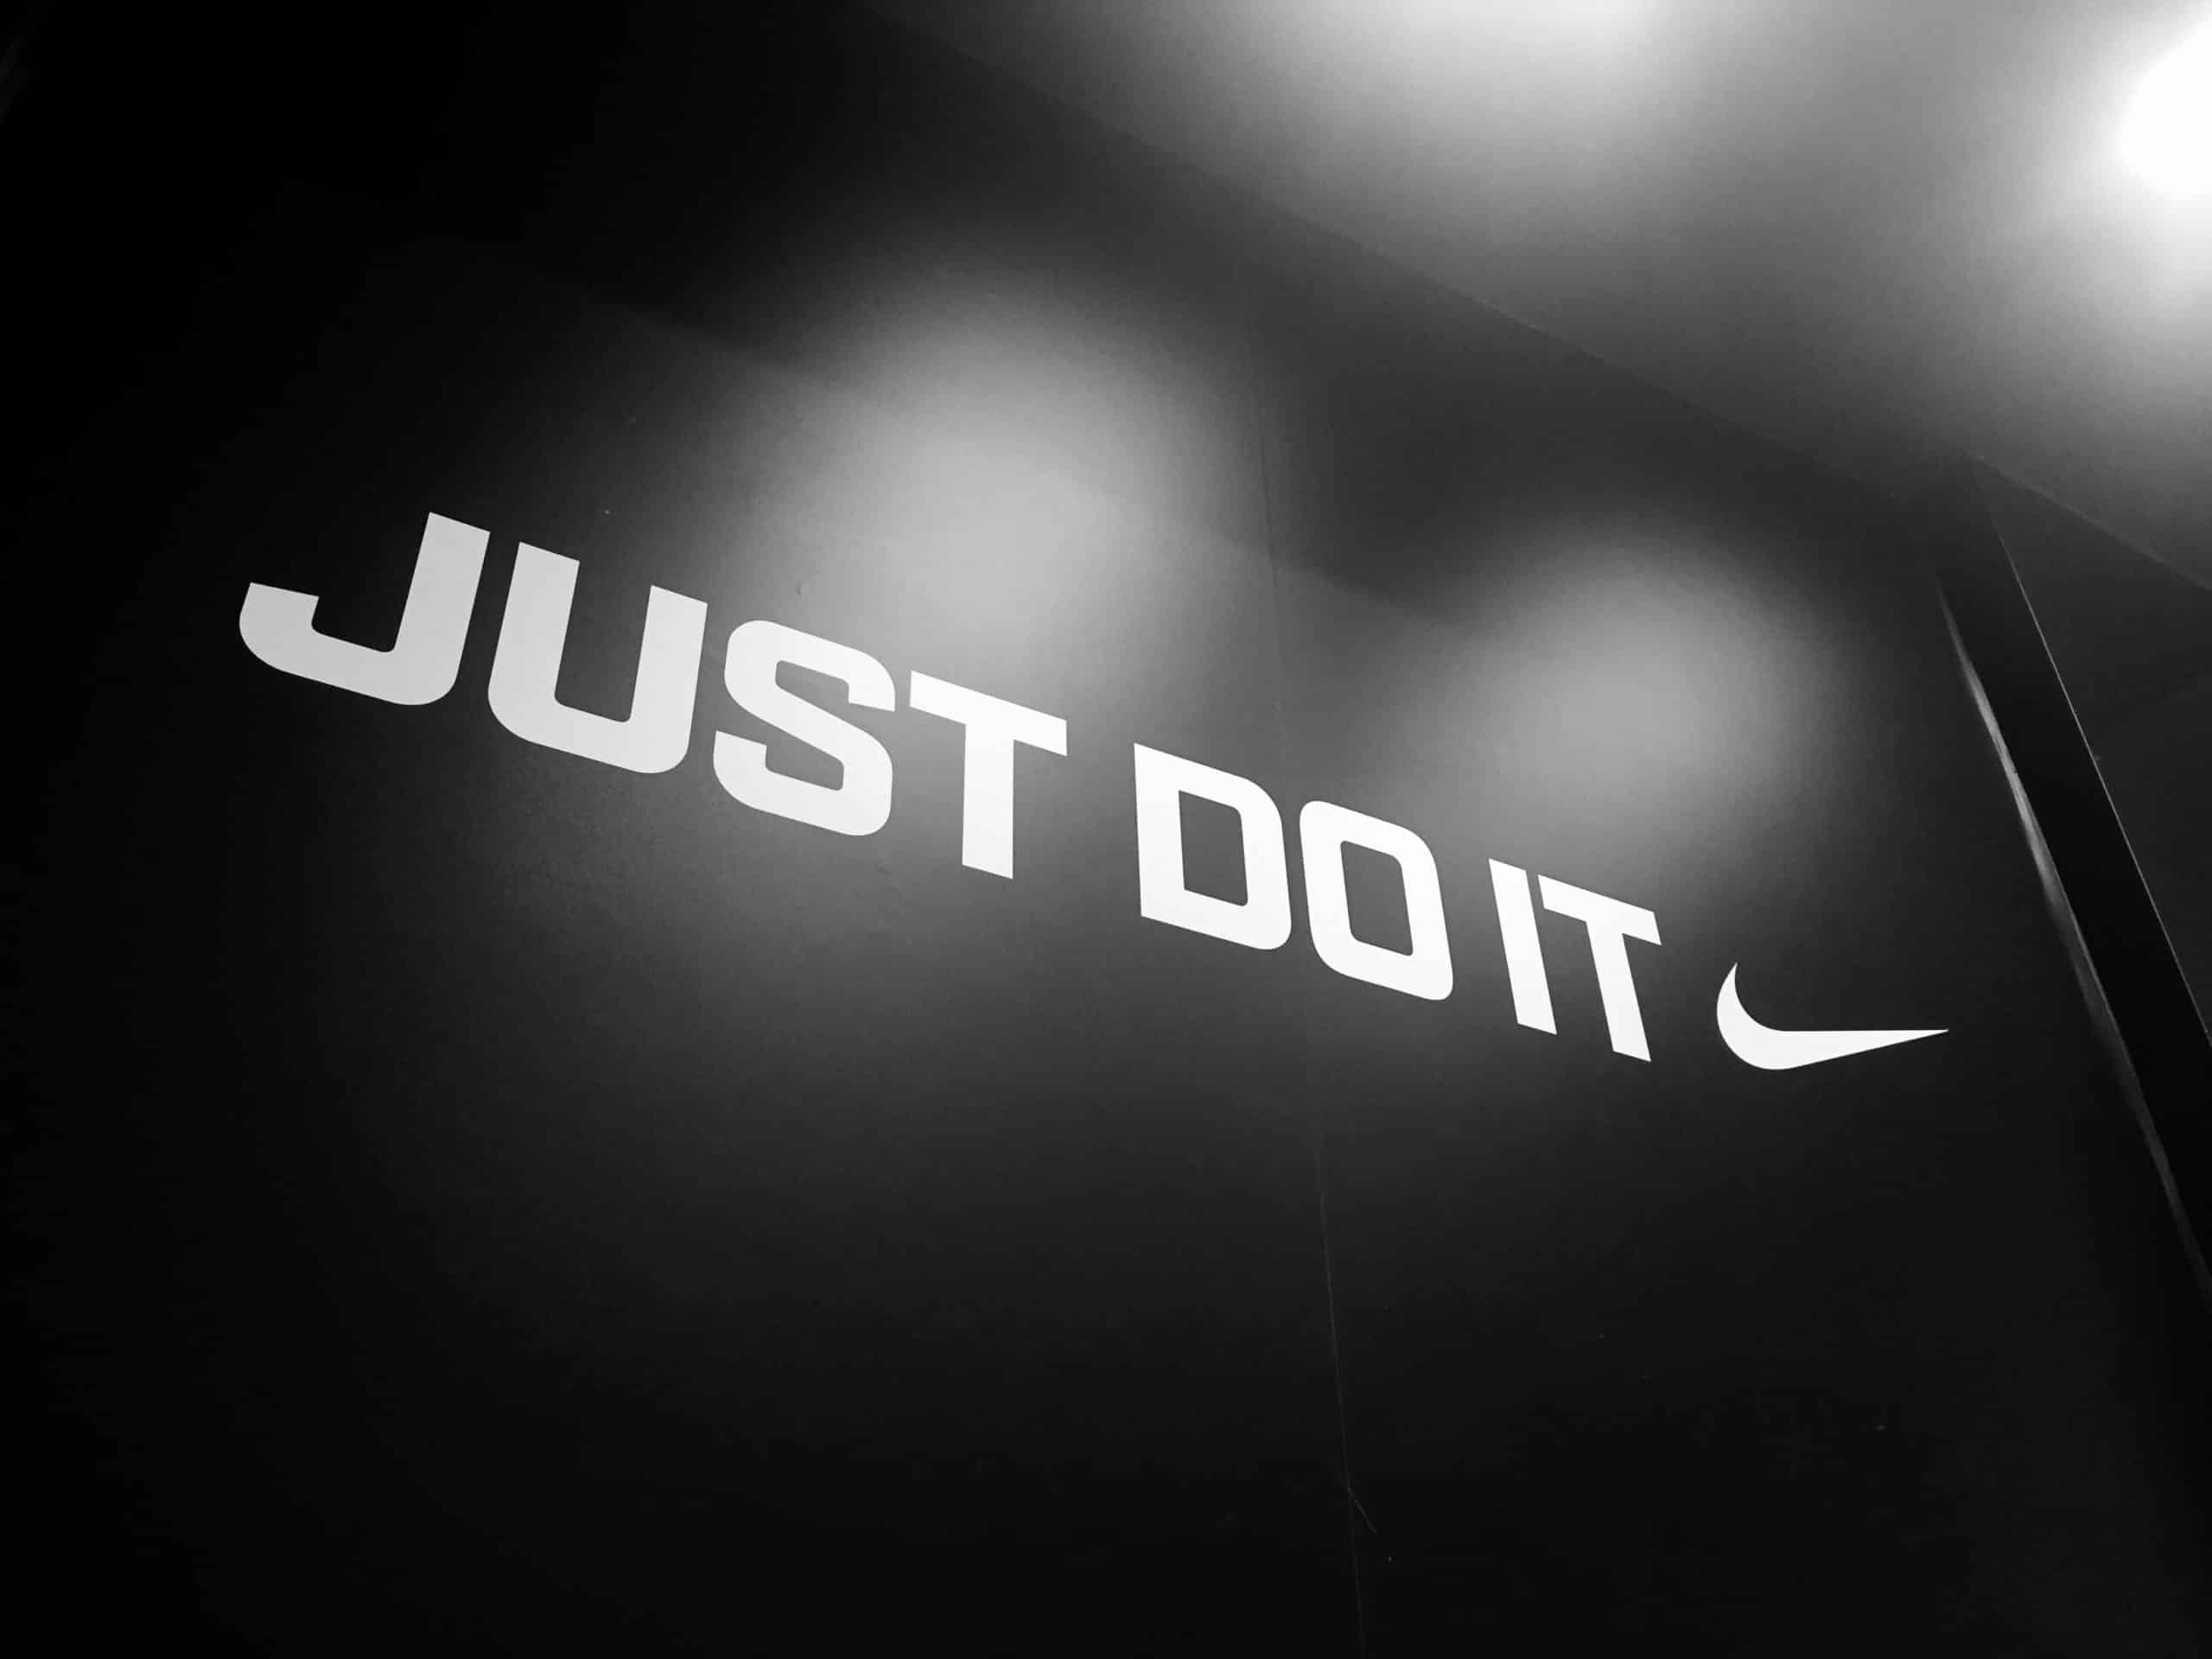 Nike logo, what makes a logo and brand so attractive